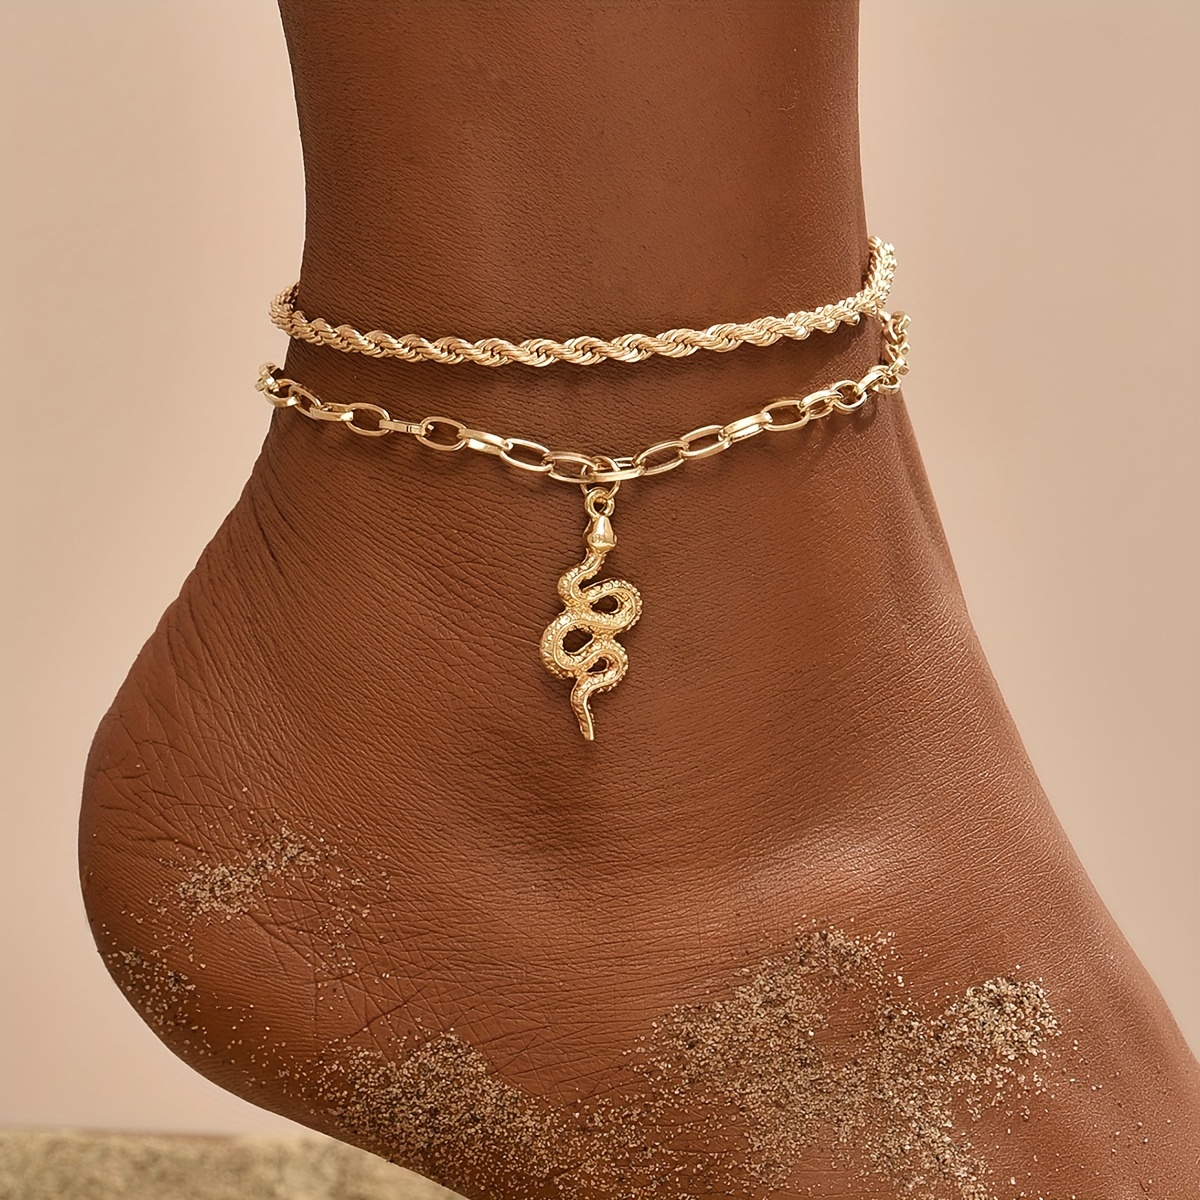 

2 Pcs/set Of Unique Snake Pendant Anklet Iron 14k Gold Plated Jewelry Vintage Bohemian Style Personality Gift